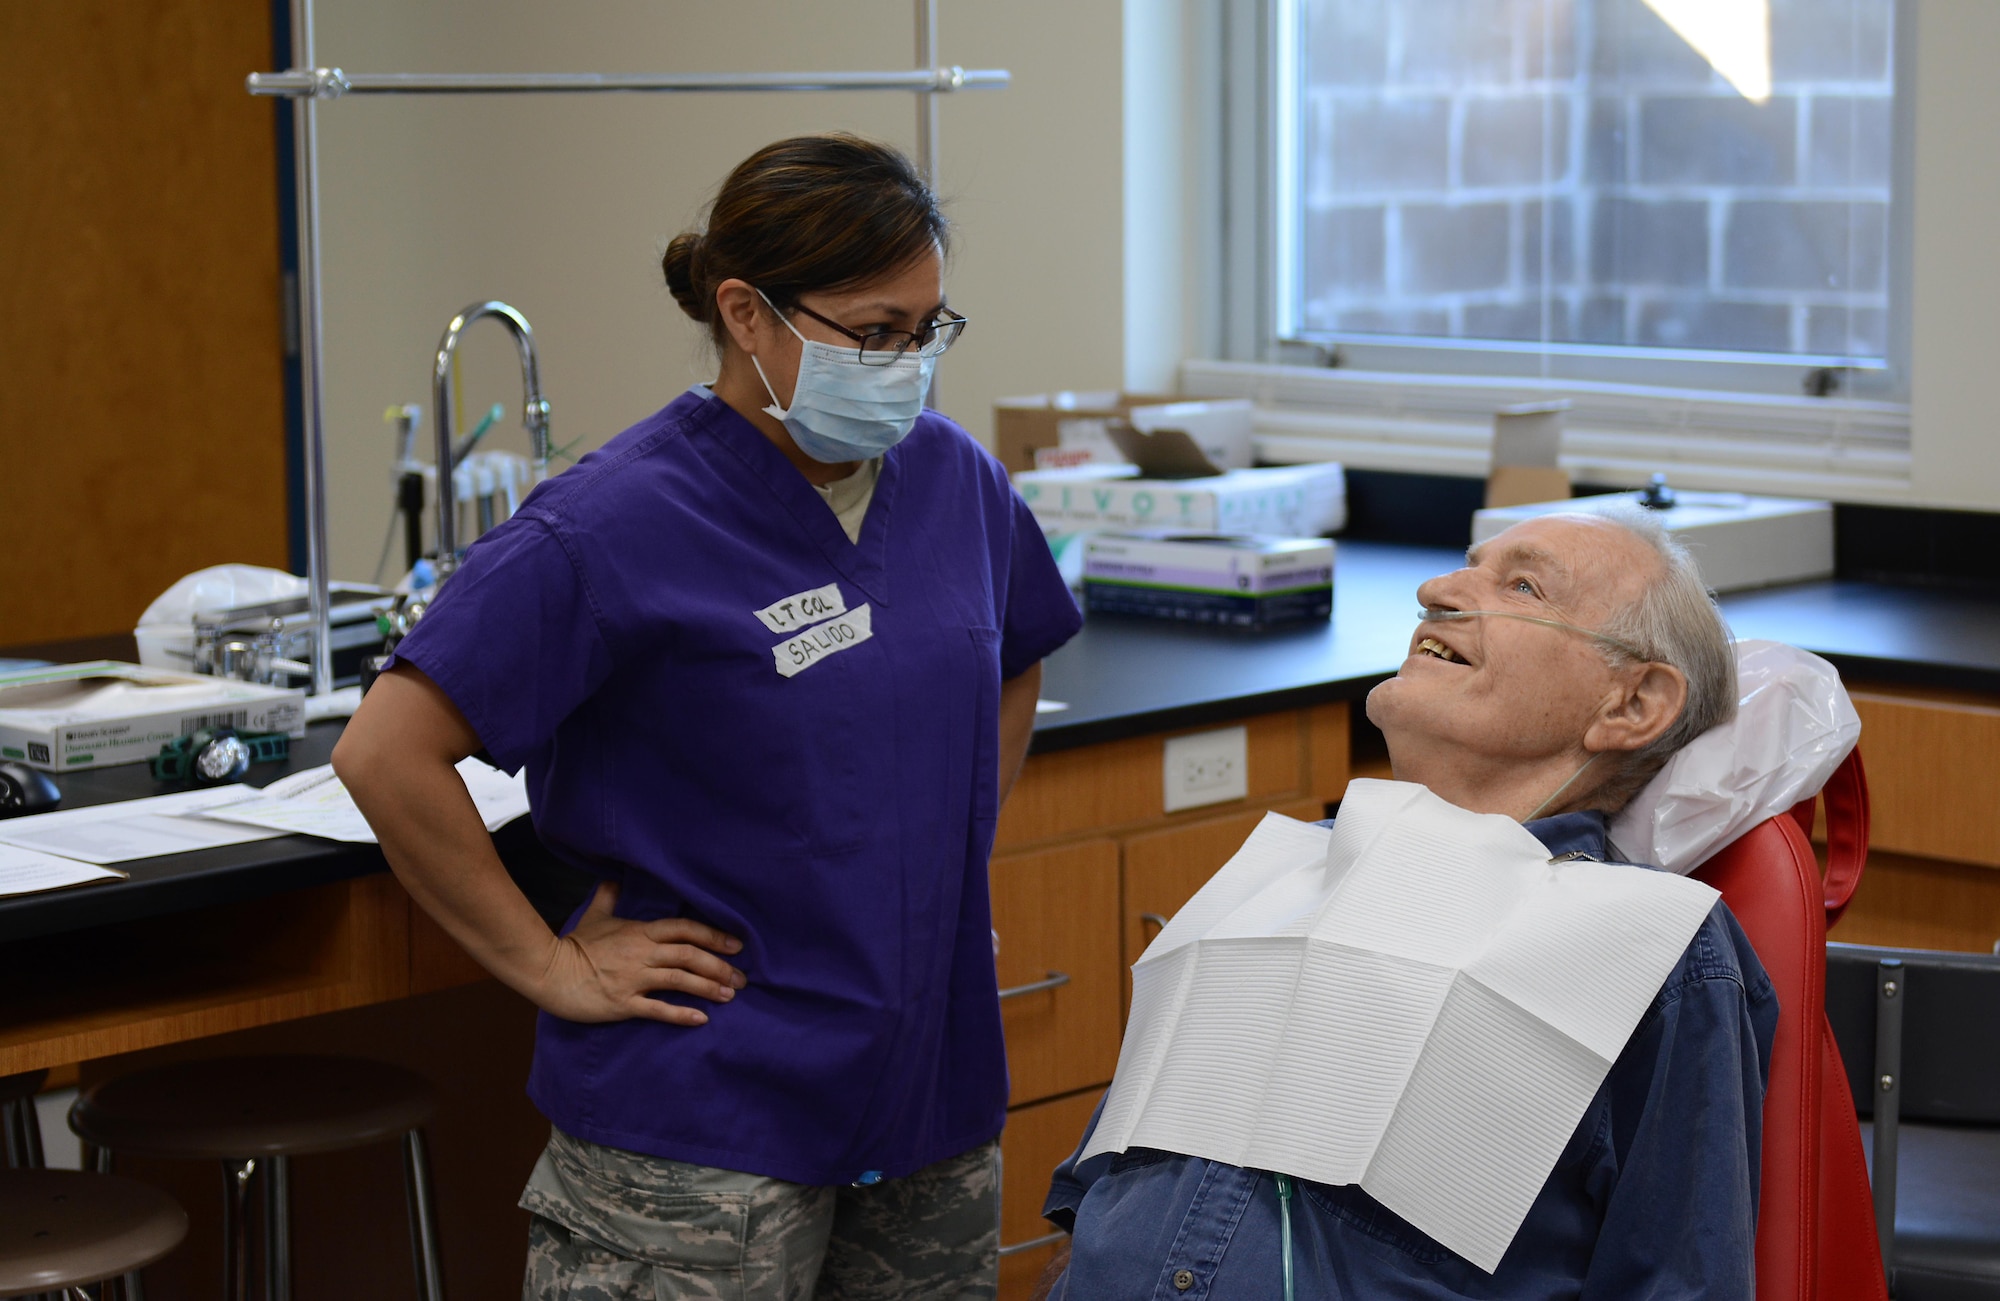 Air Force Lt. Col. Joan Salido, a dentist from the 445th Aerospace Medicine Squadron of Wright-Patterson Air Force Base, Ohio, preps a patient during Innovative Readiness Training at Mountain Home, Ark., June 12, 2017. The IRT program allows active-duty, guard and reserve members to volunteer for real-world training opportunities through engineering, veterinarian, medical, and construction projects that benefit the sometimes-forgotten citizens of American communities in need. (U.S. Air National Guard photo by Staff Sgt. Carlynne DeVine)